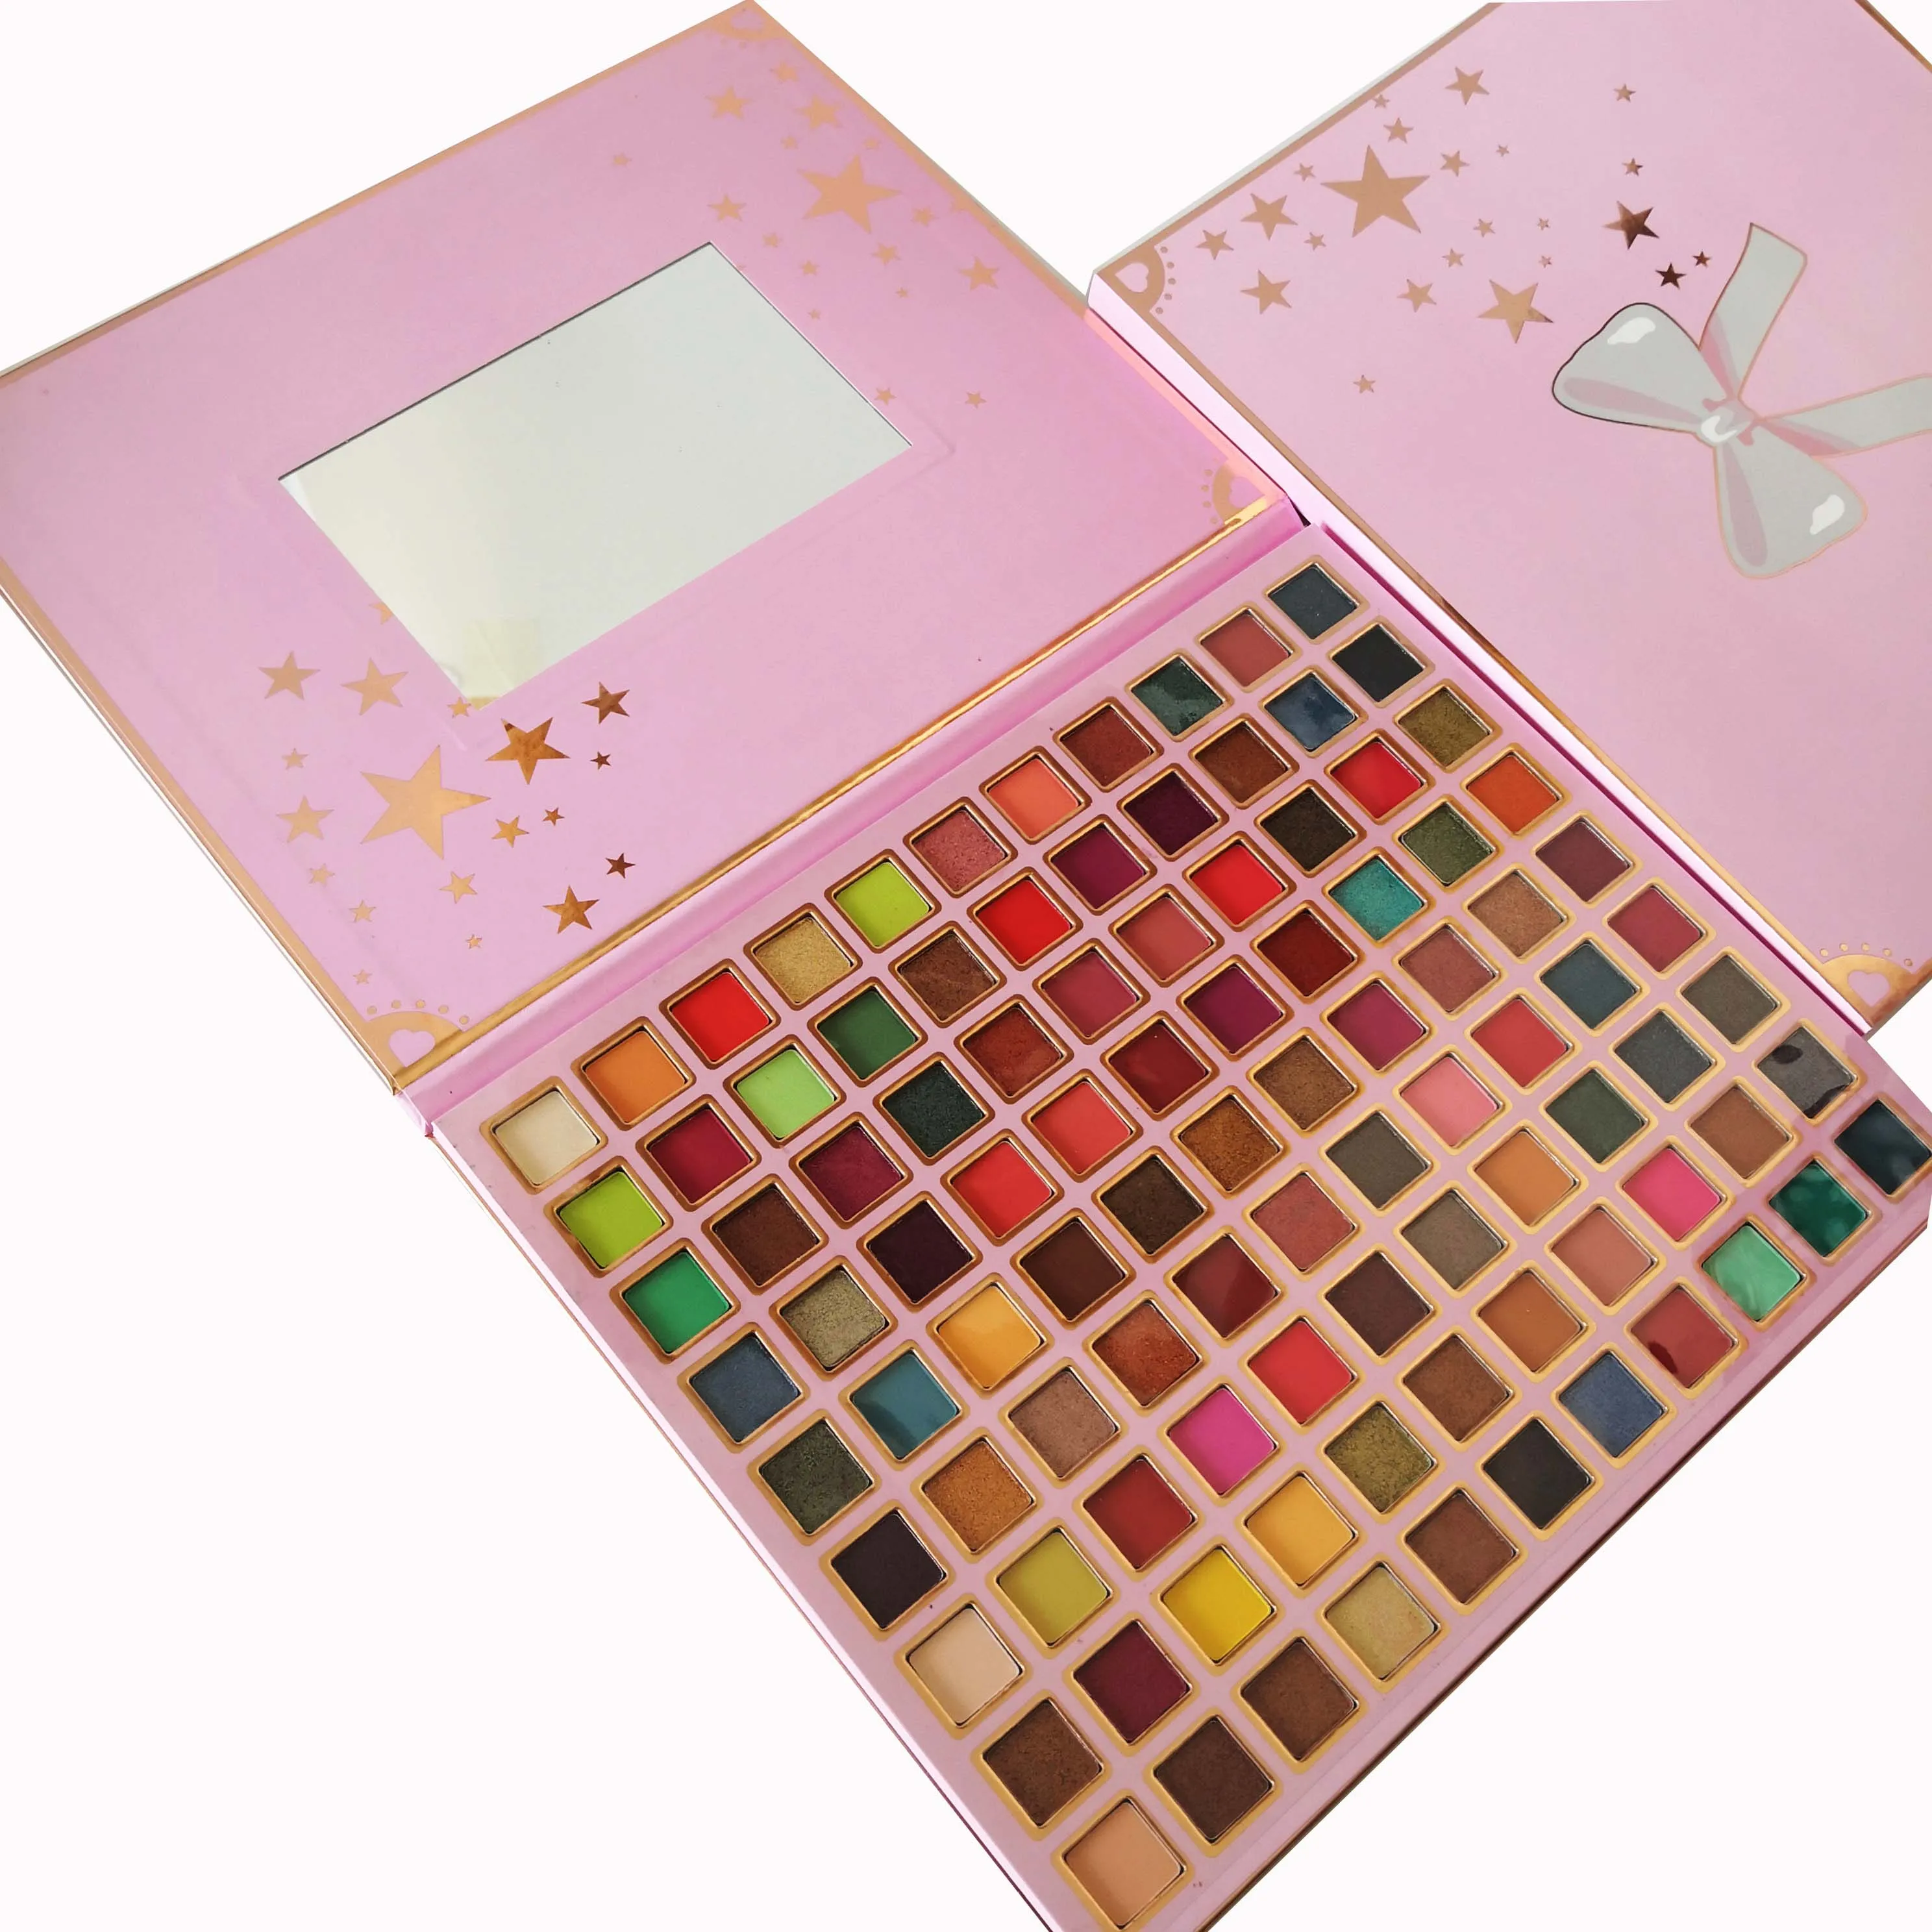 

New 99 color multicolored Eye Shadow Pearly matte vegan makeup eyeshadow palette private label